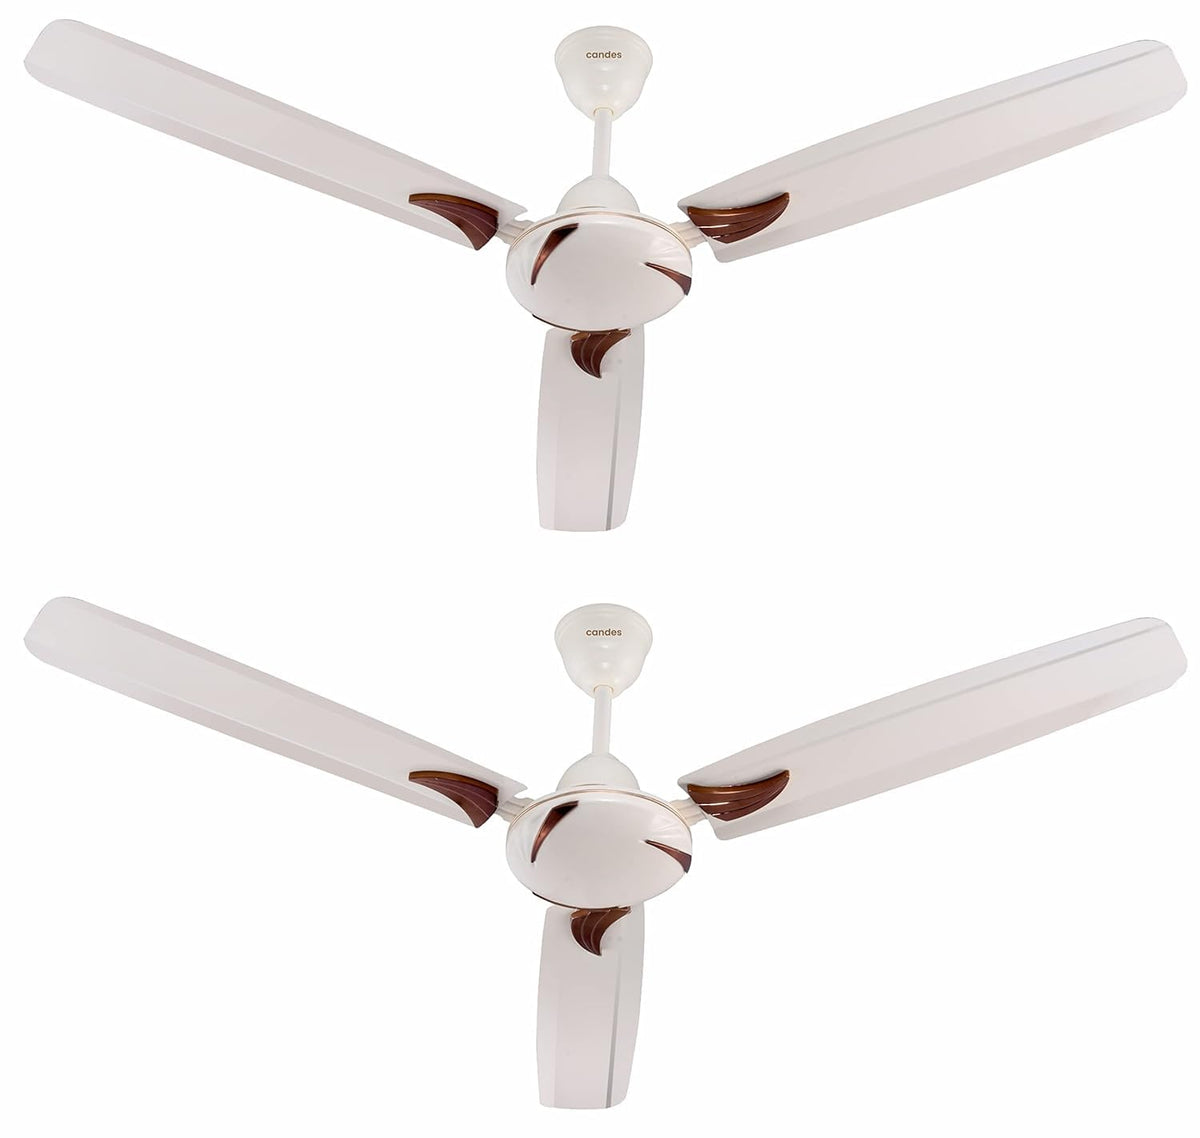 Candes Lynx 1200mm / 48 inch High Speed Decorative 405 RPM (100% CNC Winding) Ceiling Fan 2 Yrs Warranty, Pack of 2 (Ivory)